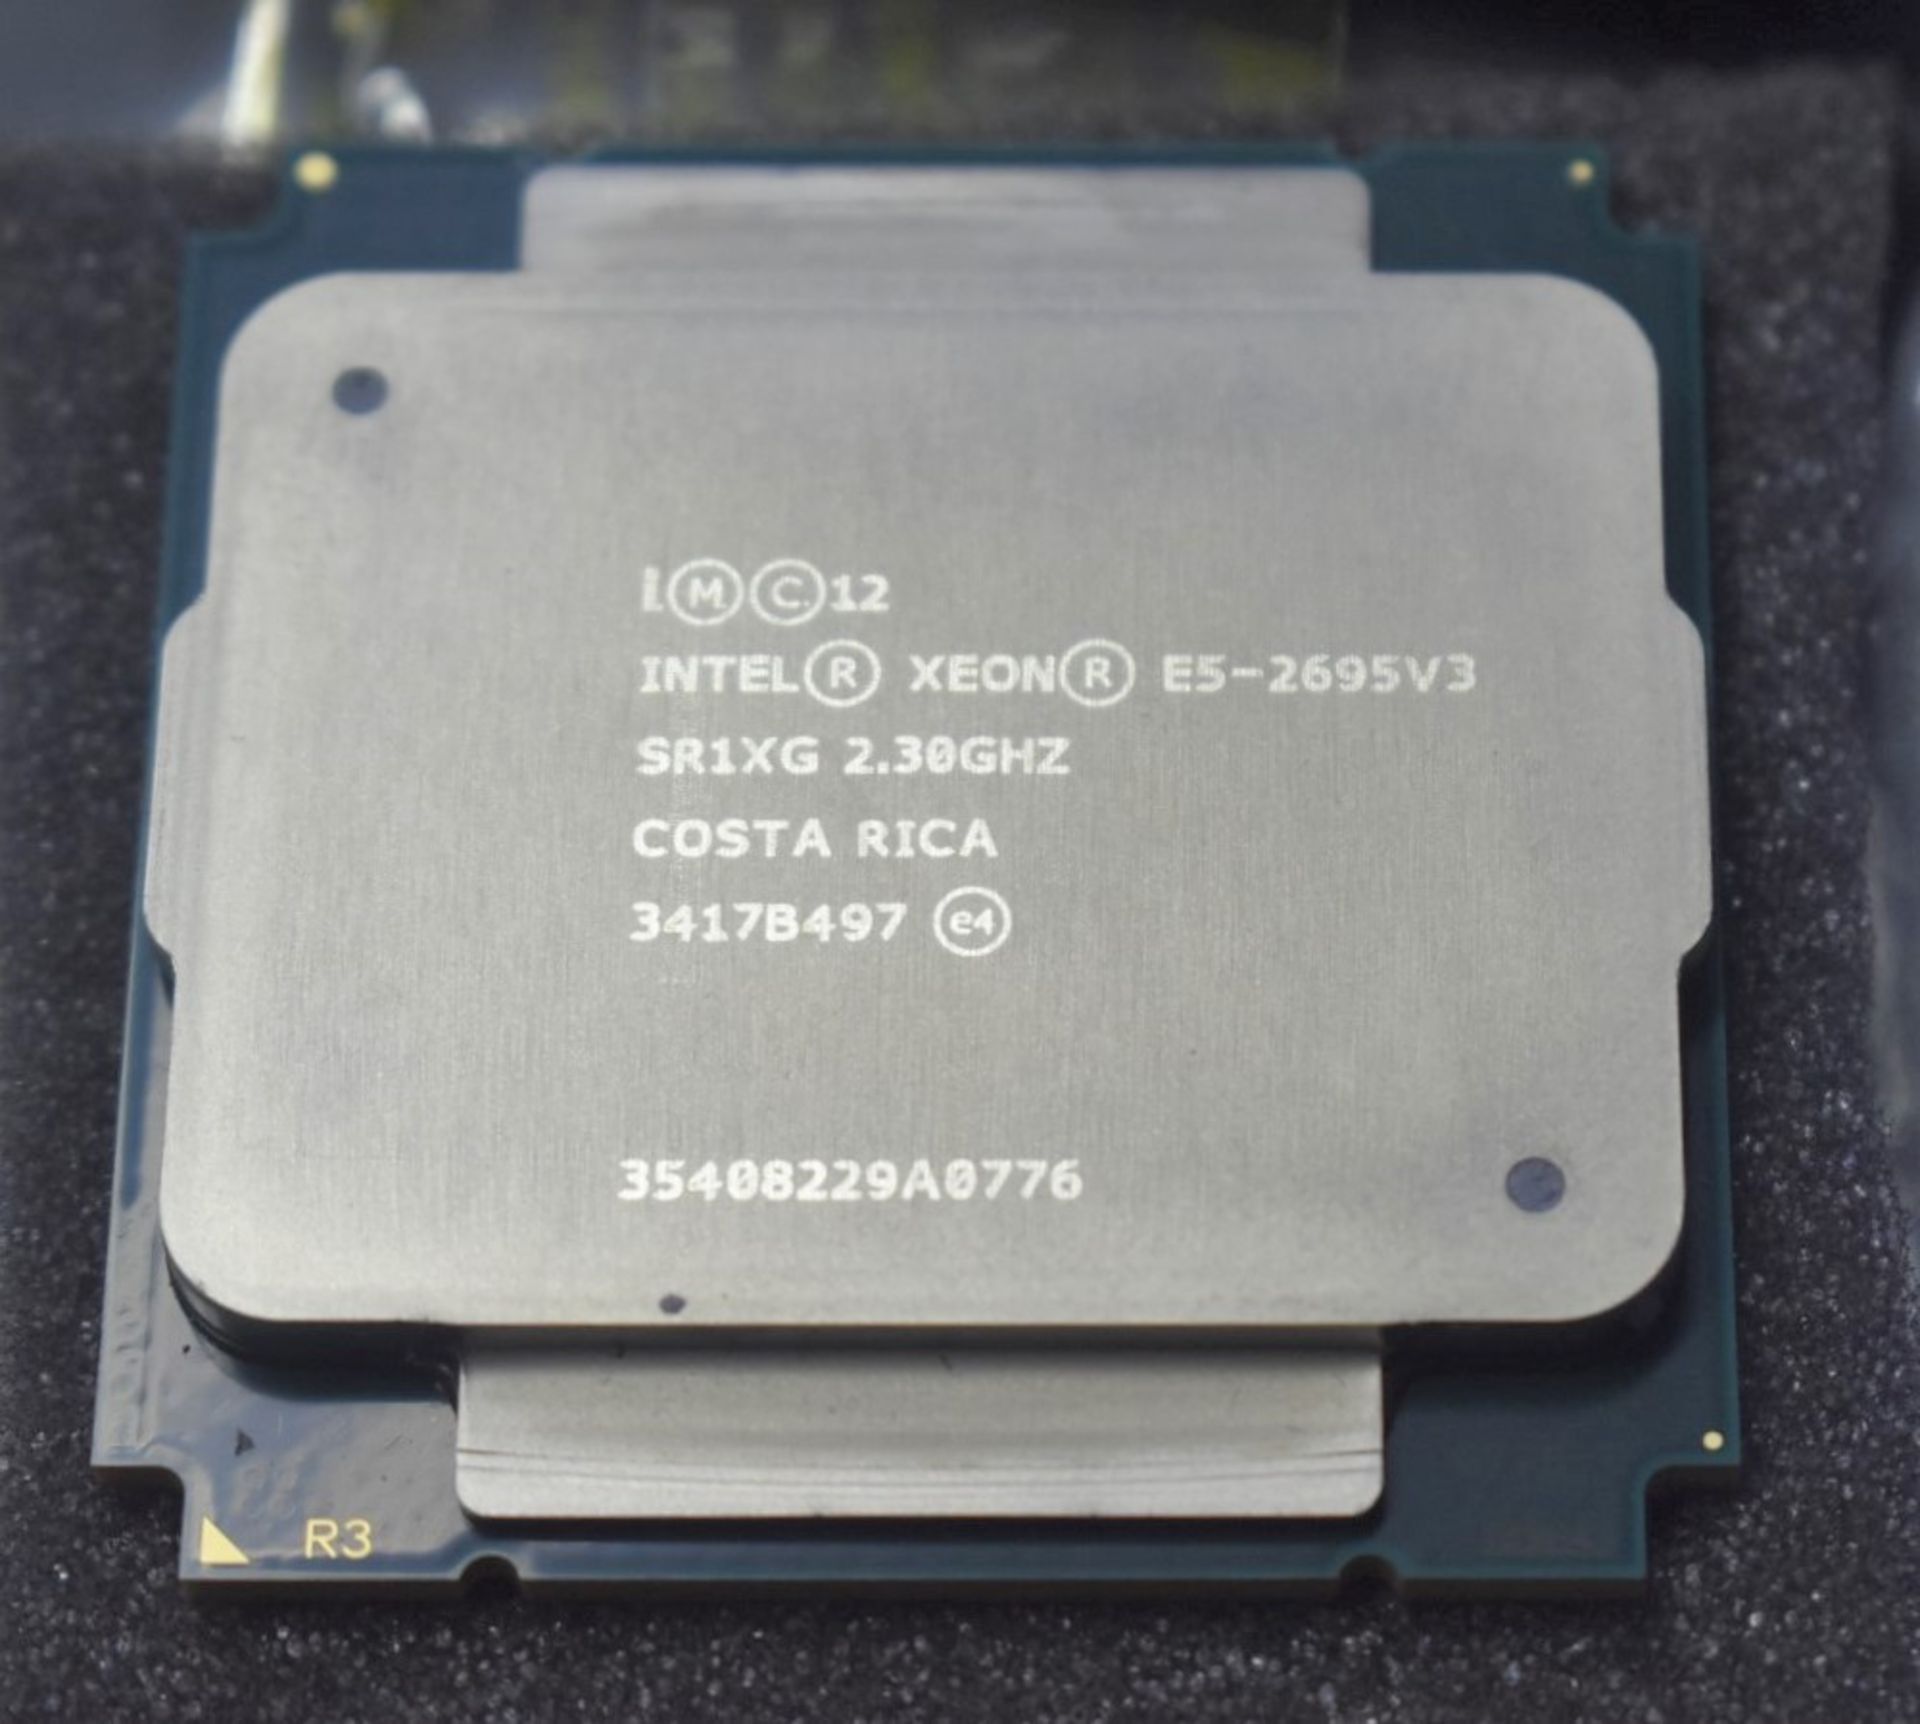 1 x Intel Xeon E5-2695V3 3.3ghz Processor - Features 14 Cores and 28 Threads, 35mb Cache, Socket